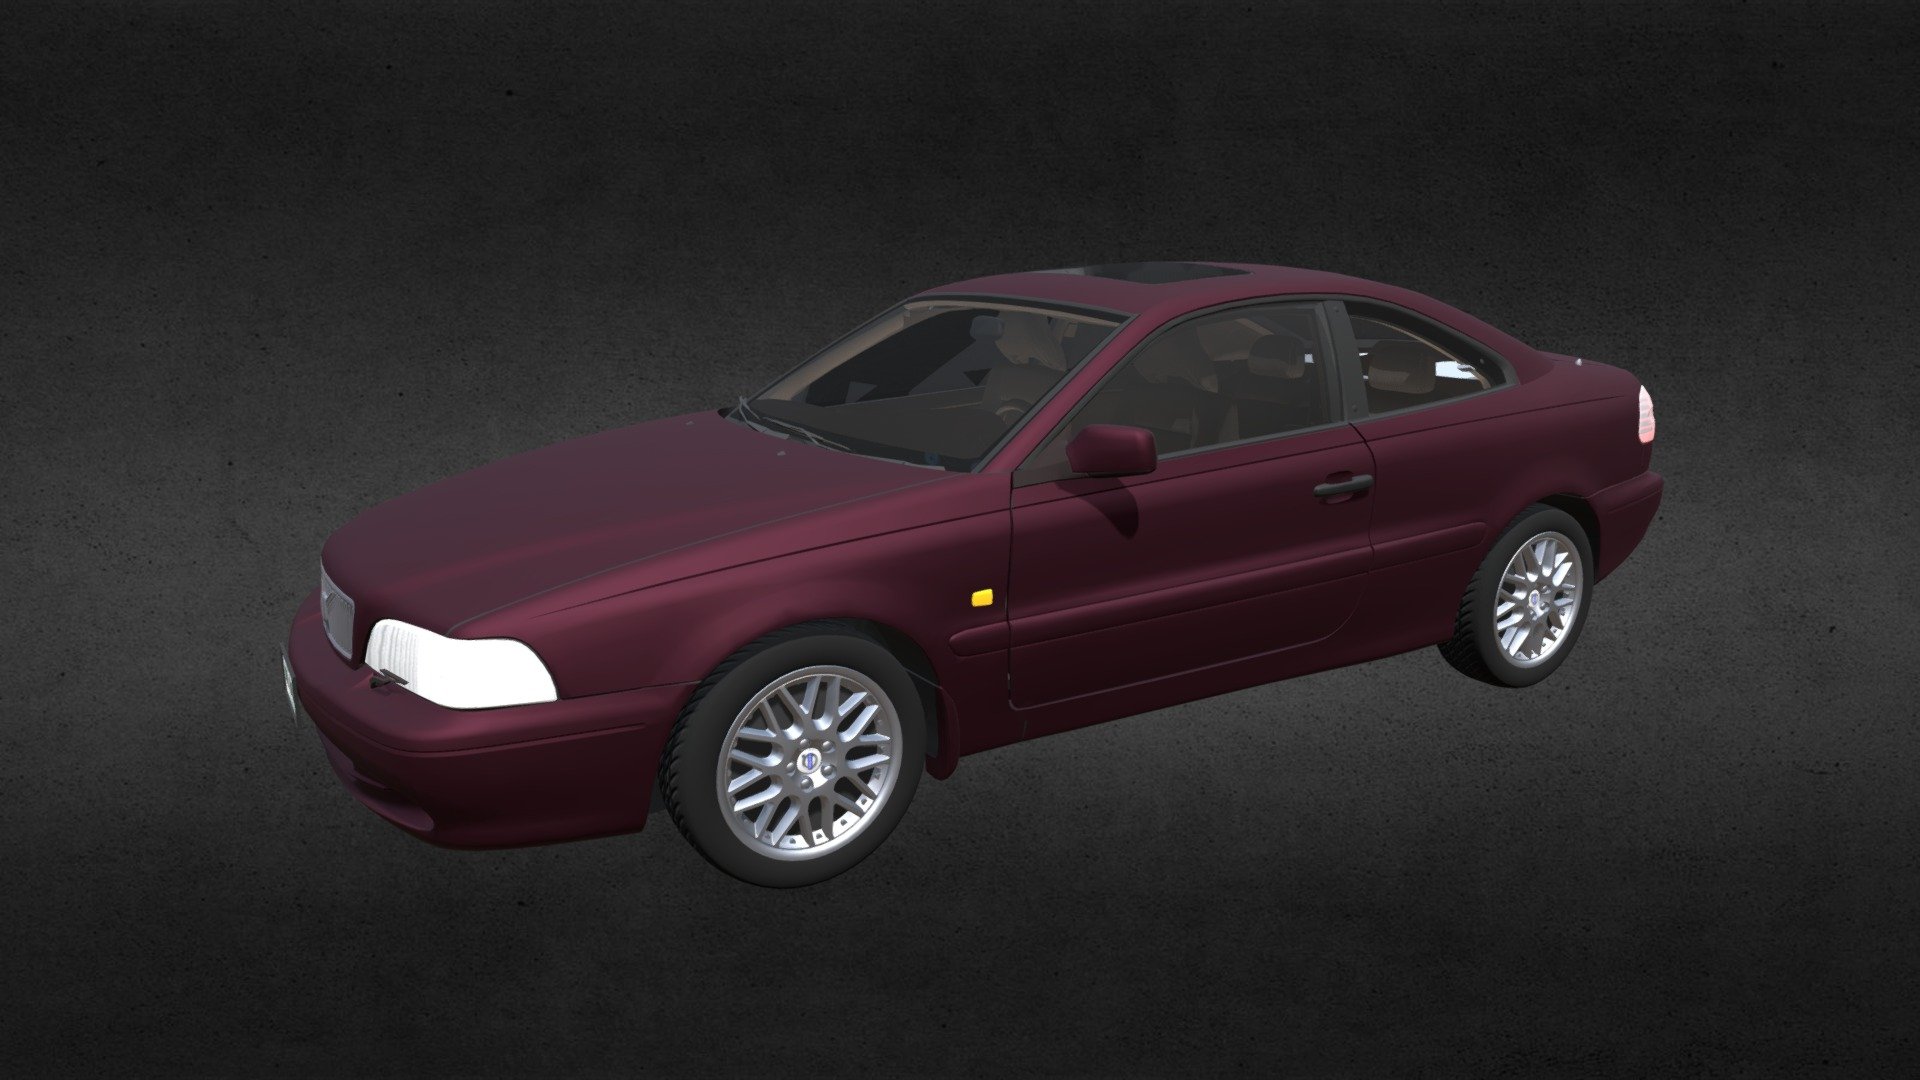 This digital model is based on the 2000 version of the Volvo C70. Digitally scanned from the actual car, which gives the digital model a highly accurate shape. 

Product Features:




Has a highly detailed dashboard and interior, which can be seen through the windows.

The wheels, hood, trunk, and doors are separate groups, which your software should read as separate parts.

Includes a detailed trunk interior.

Does not include an engine.

The model is UV mapped.

Includes the following texture maps:




Seat Fabric

Dash Instruments

Interior&hellip; or use your own leather/ fabric shader

Trunk Interior

License plate and displacement map

Original model by Digimation and sold here with permission 3d model